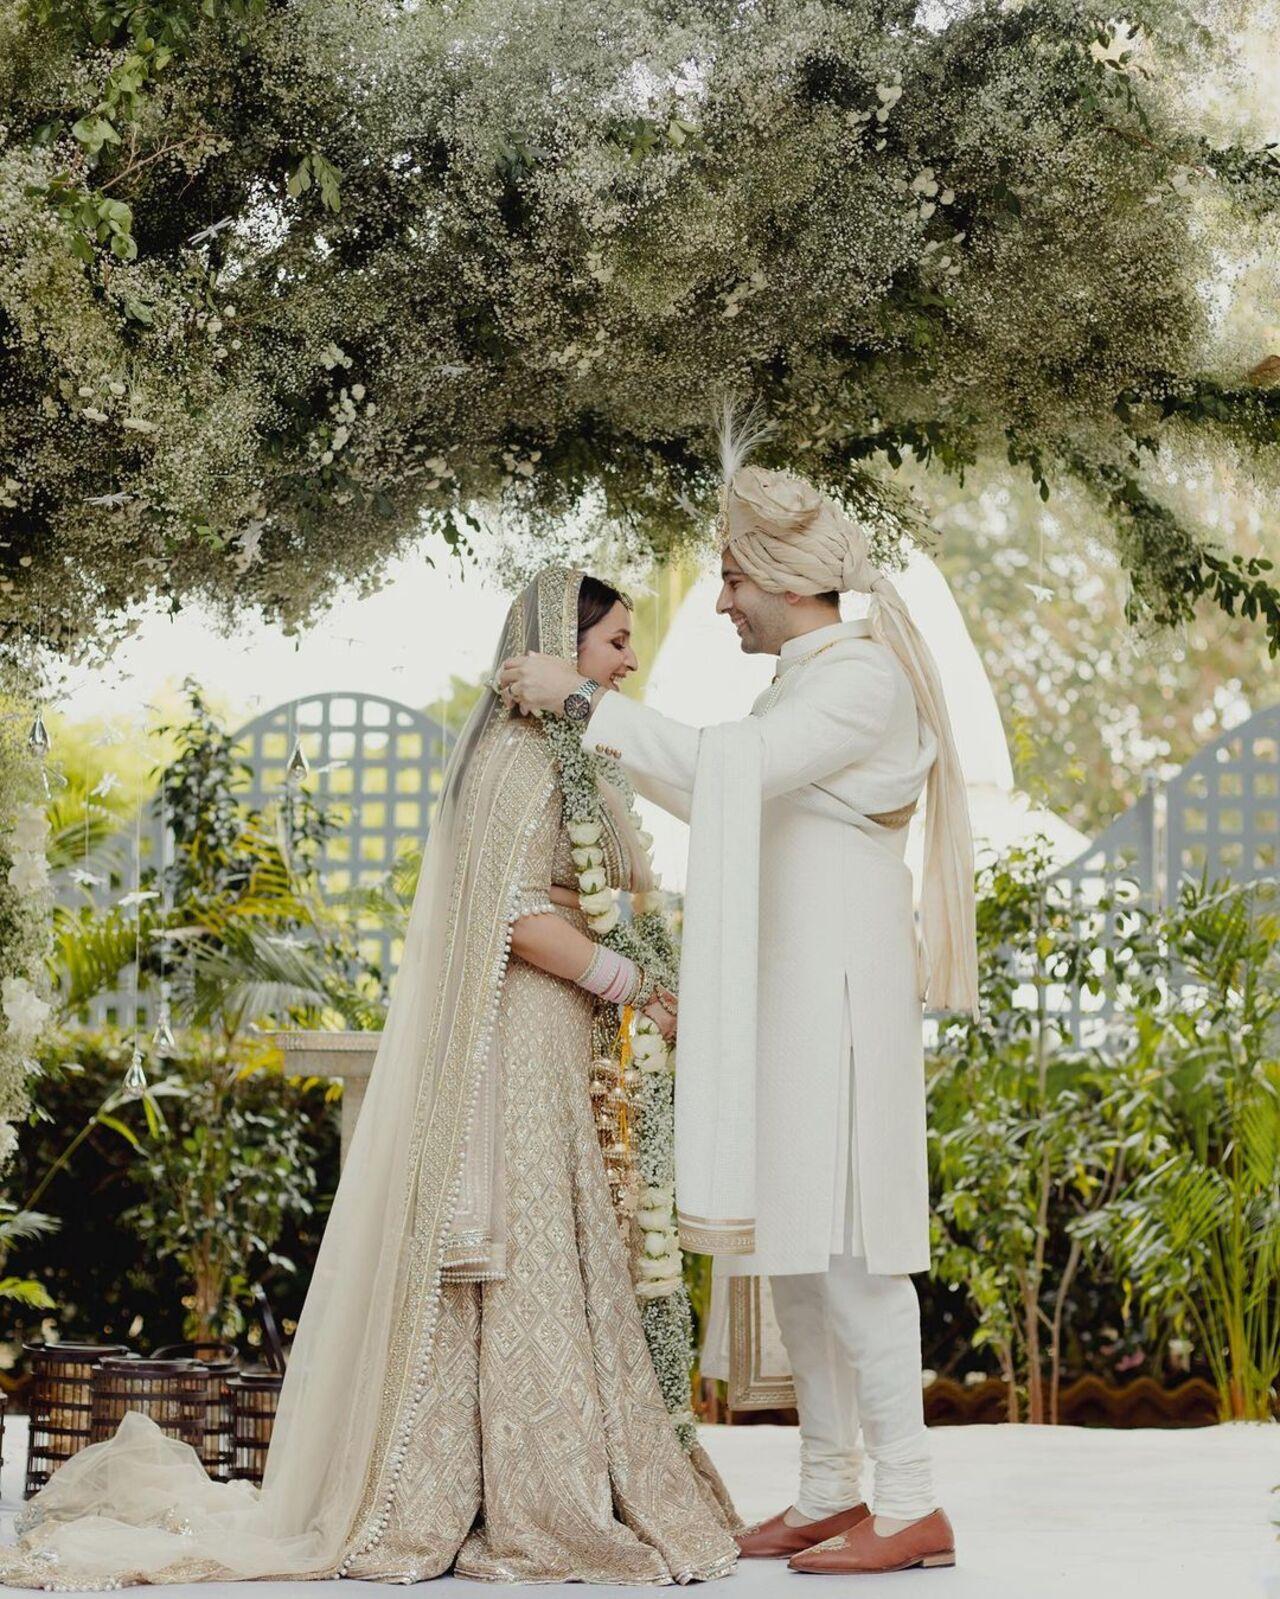 While Ragahv opted for an all-white sherwani by Manish Malhotra for his big day, Parineeti opted for a champagne-coloured heavily embroidered lehenga by the same designer